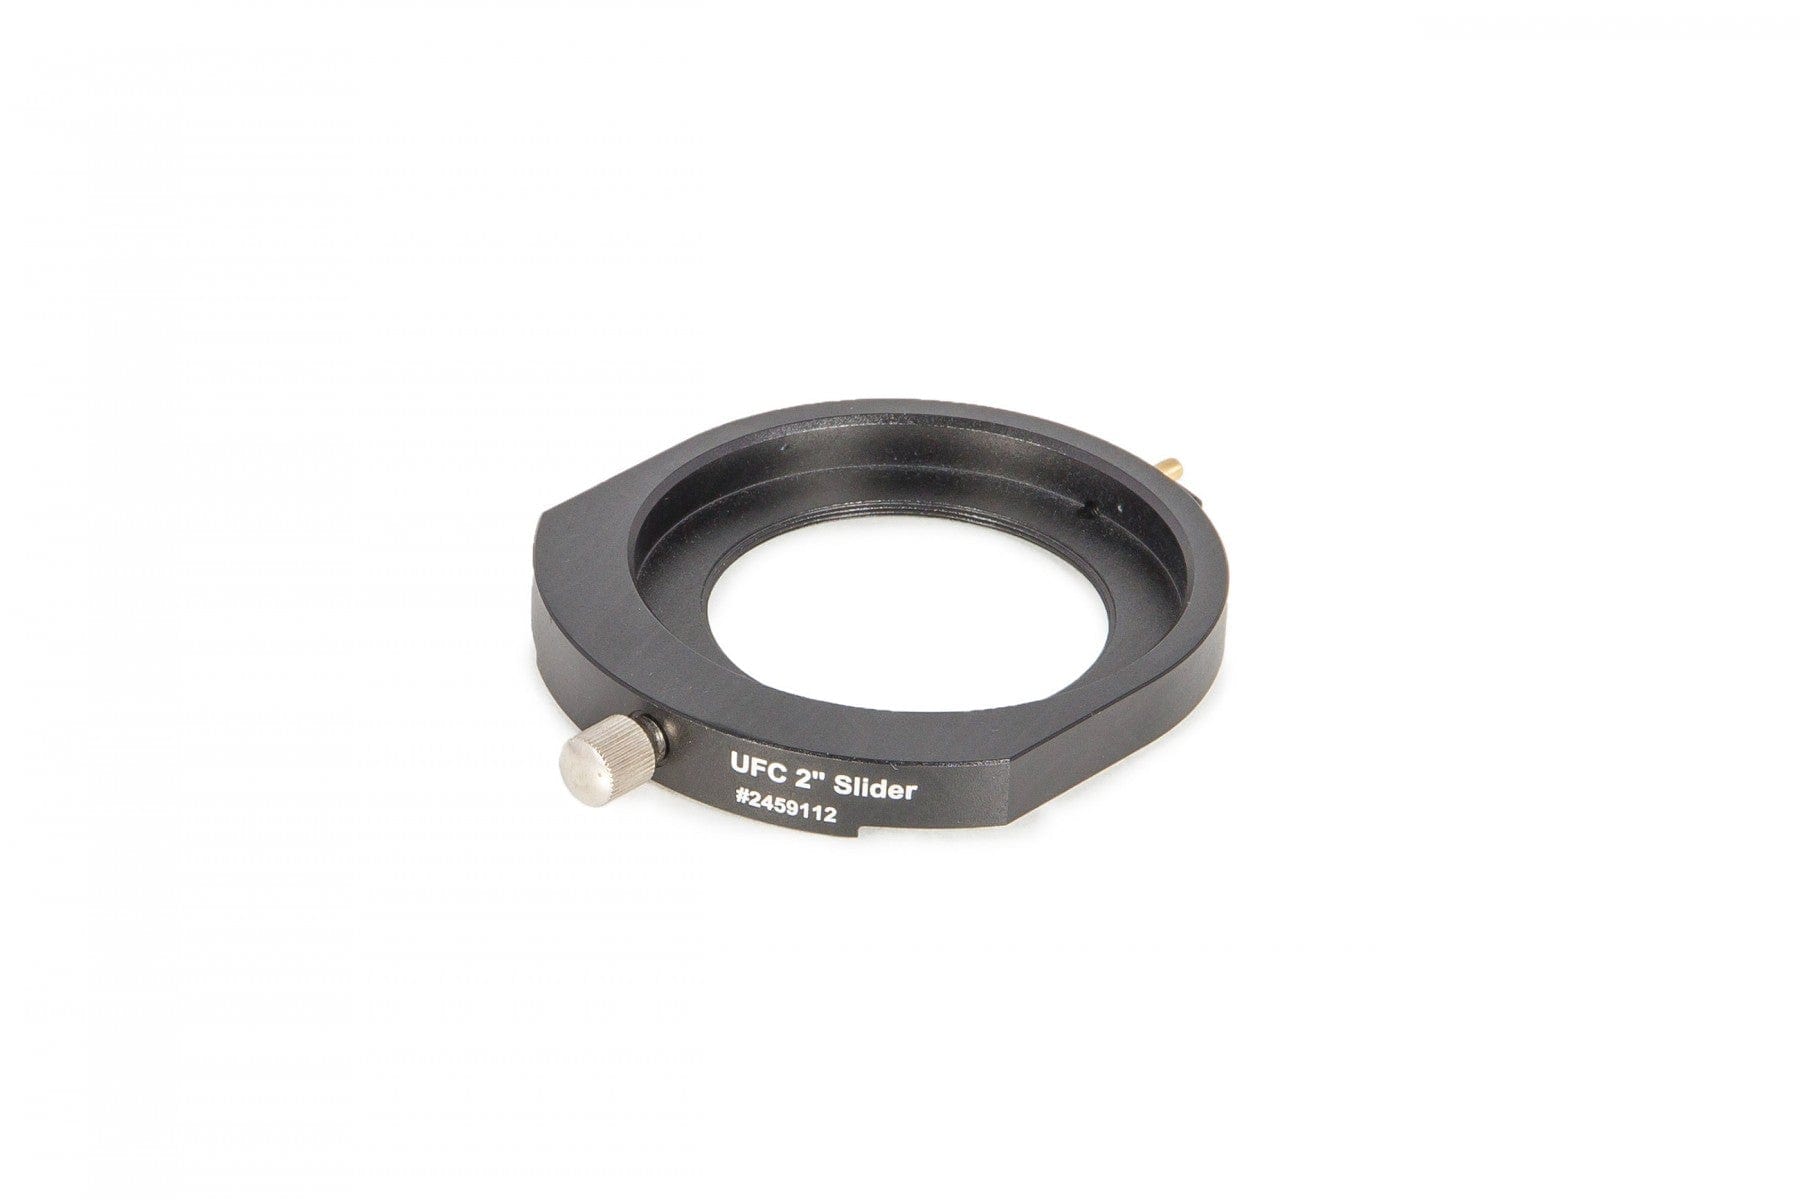 Baader Planetarium Accessory Baader UFC 2" Filter Slider M48 (for cell mounted 2" filters) - 2459112